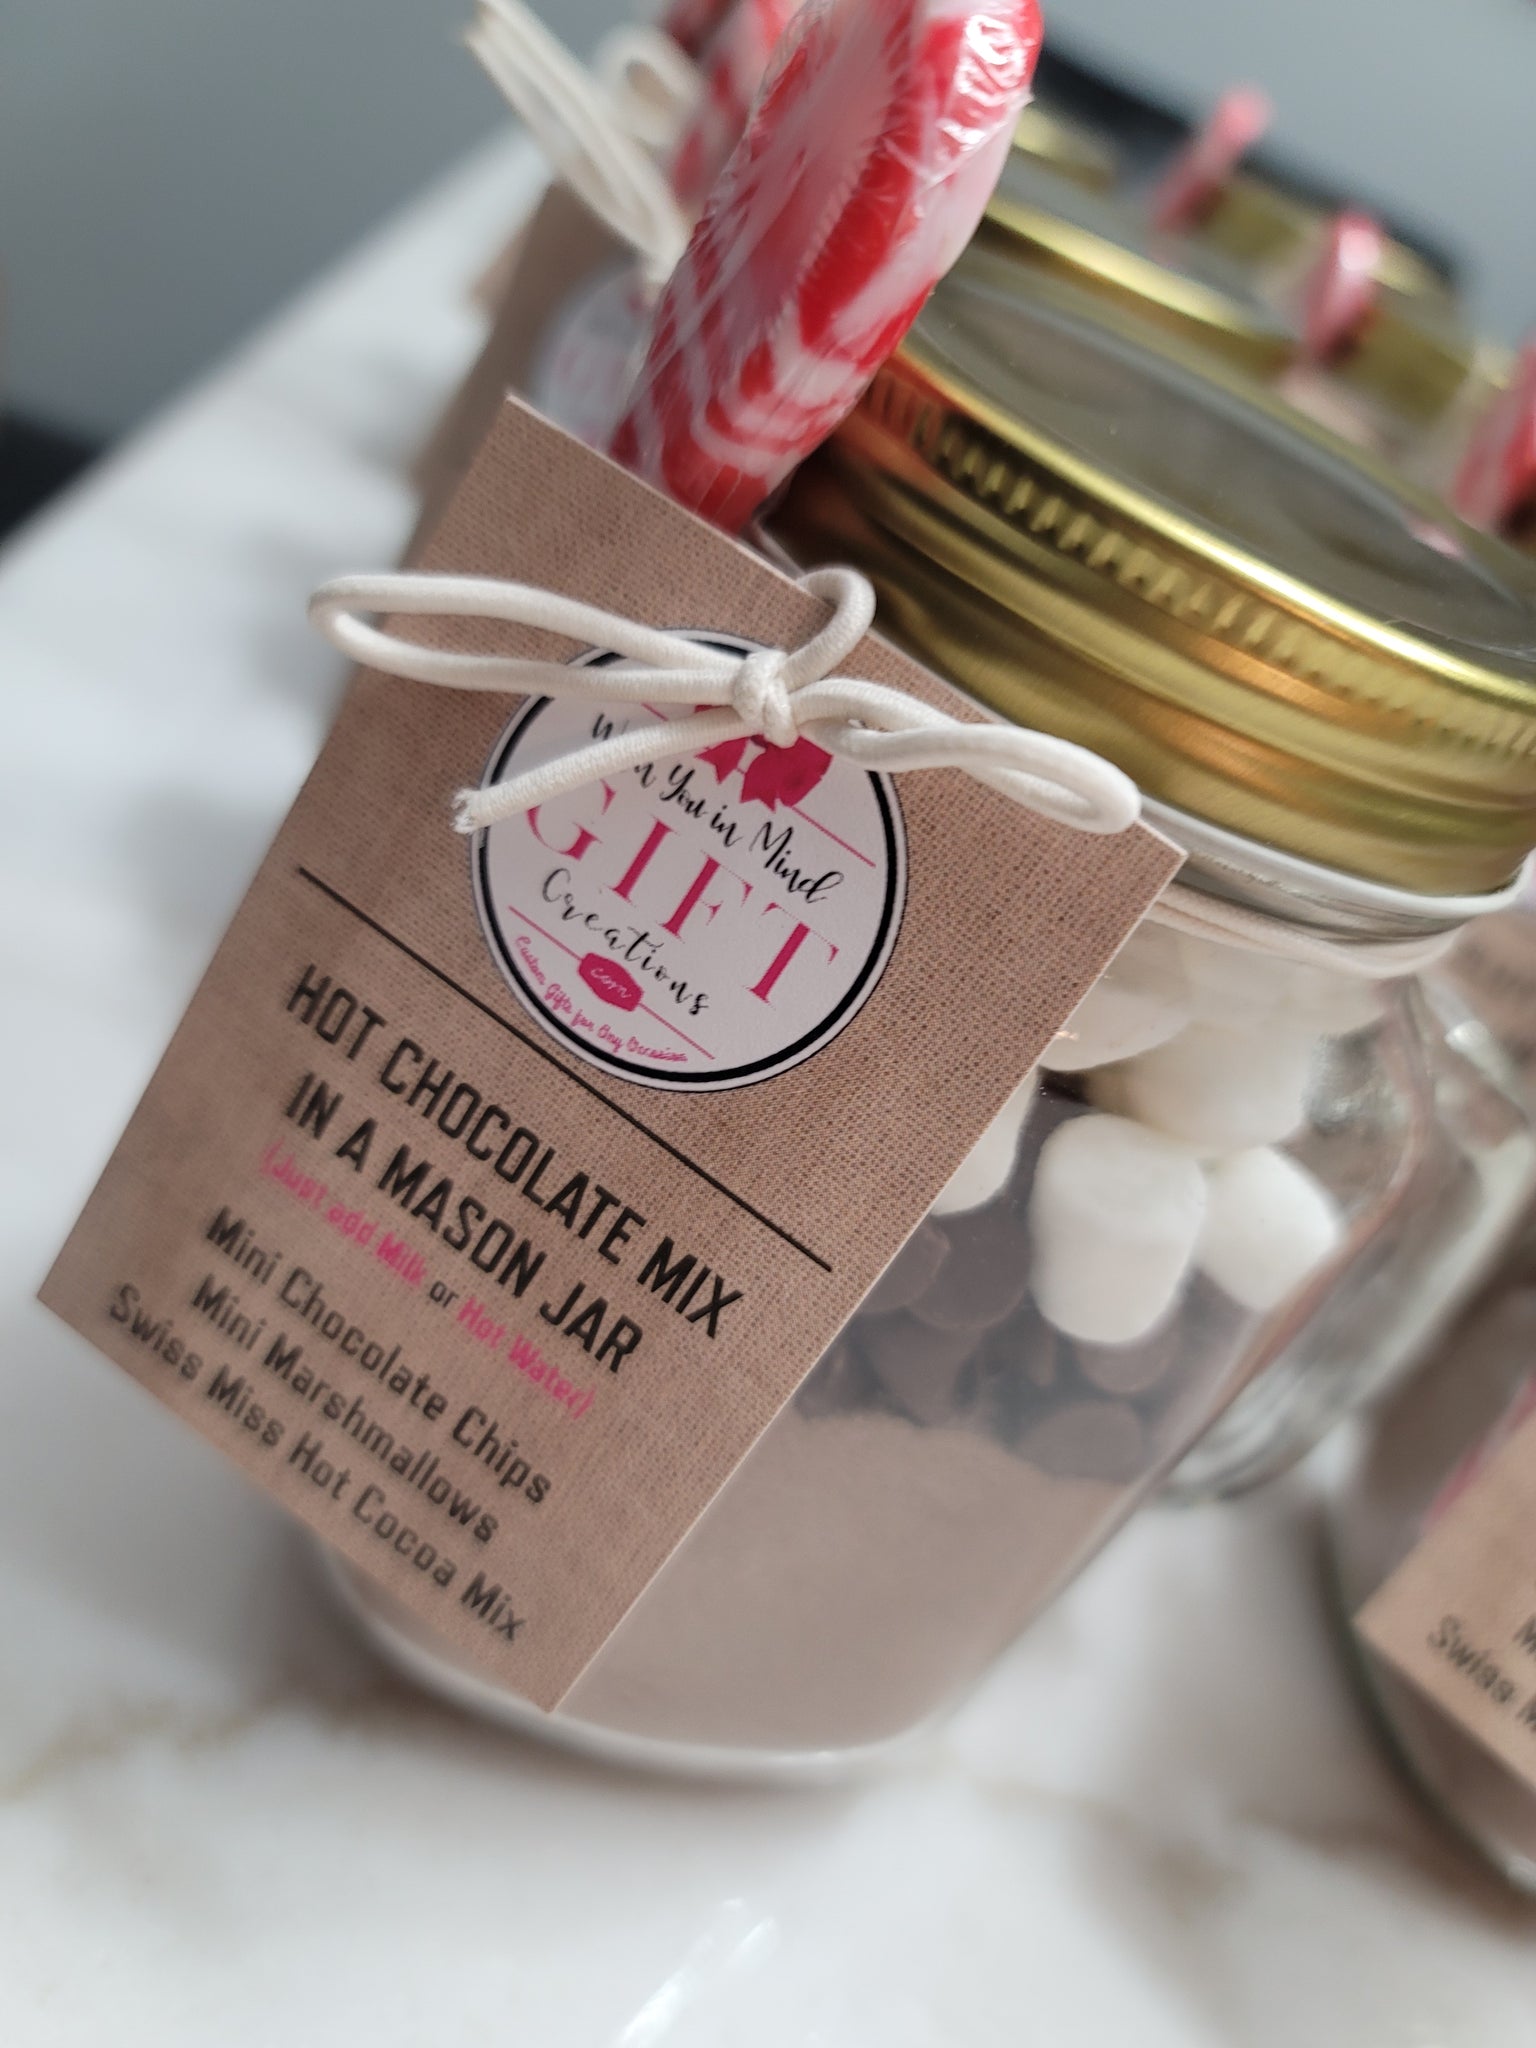 Hot Chocolate Wedding Favors, Hot Chocolate Favors, Personalized